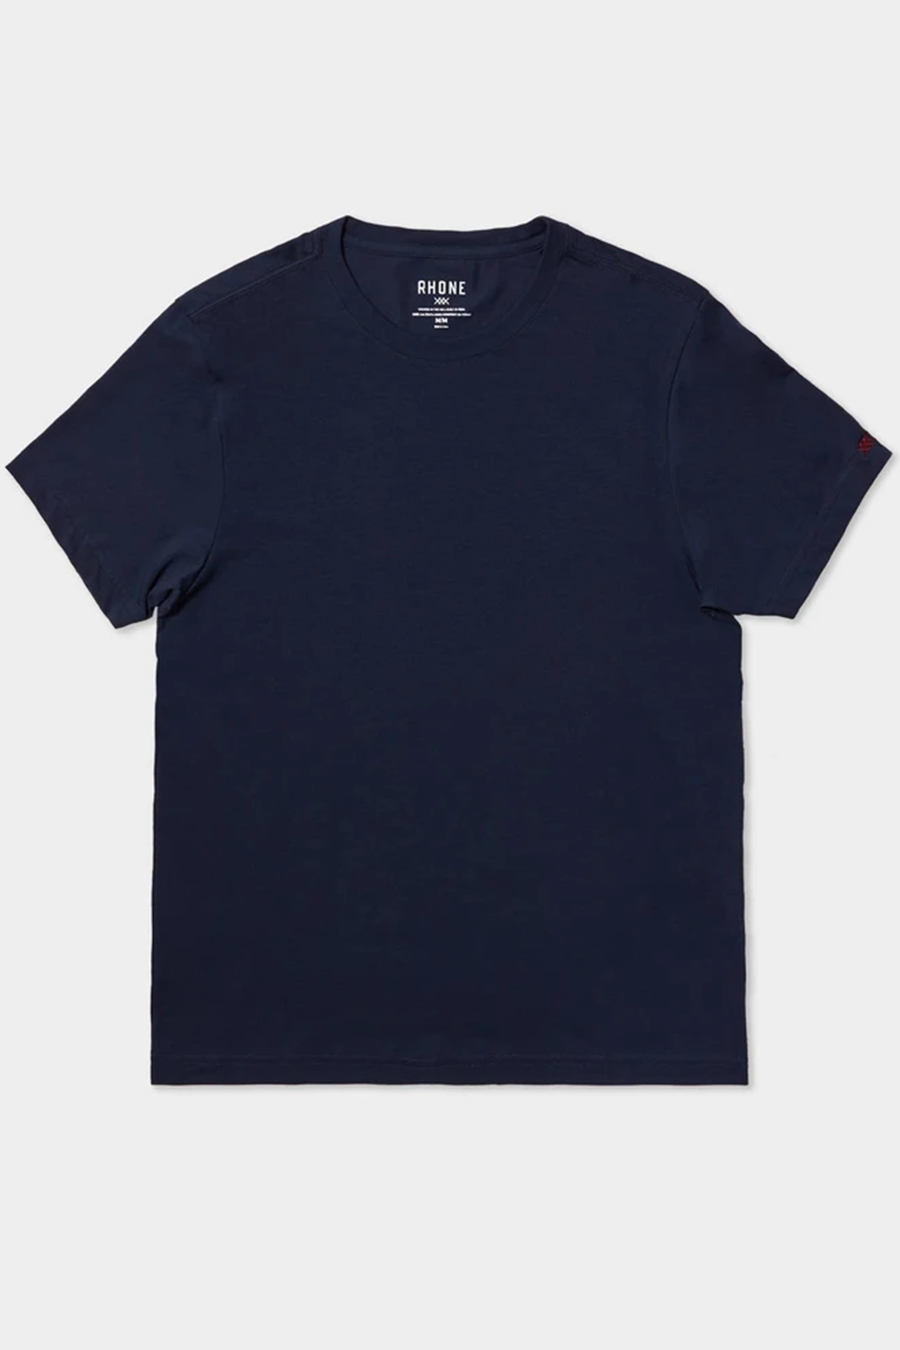 Eco Element Tee | Navy - Main Image Number 1 of 1